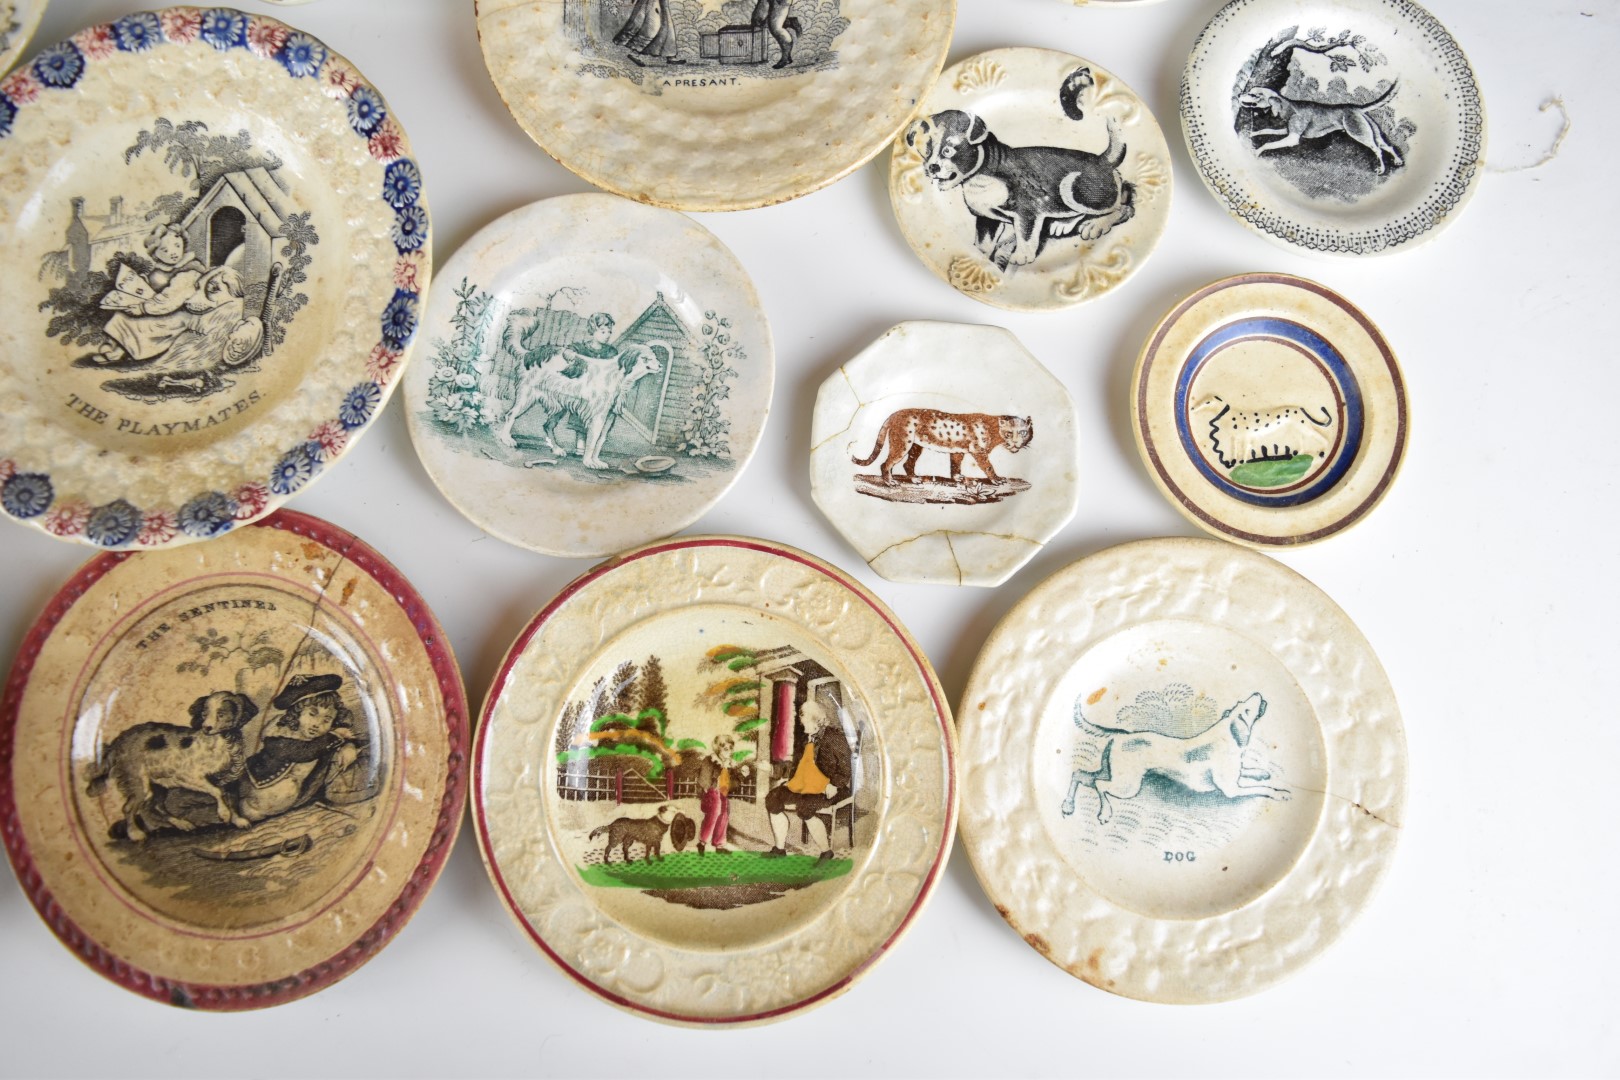 19thC nursery ware plates, mostly featuring dogs / children including The Pet, A Presant, Juvenile - Image 2 of 7